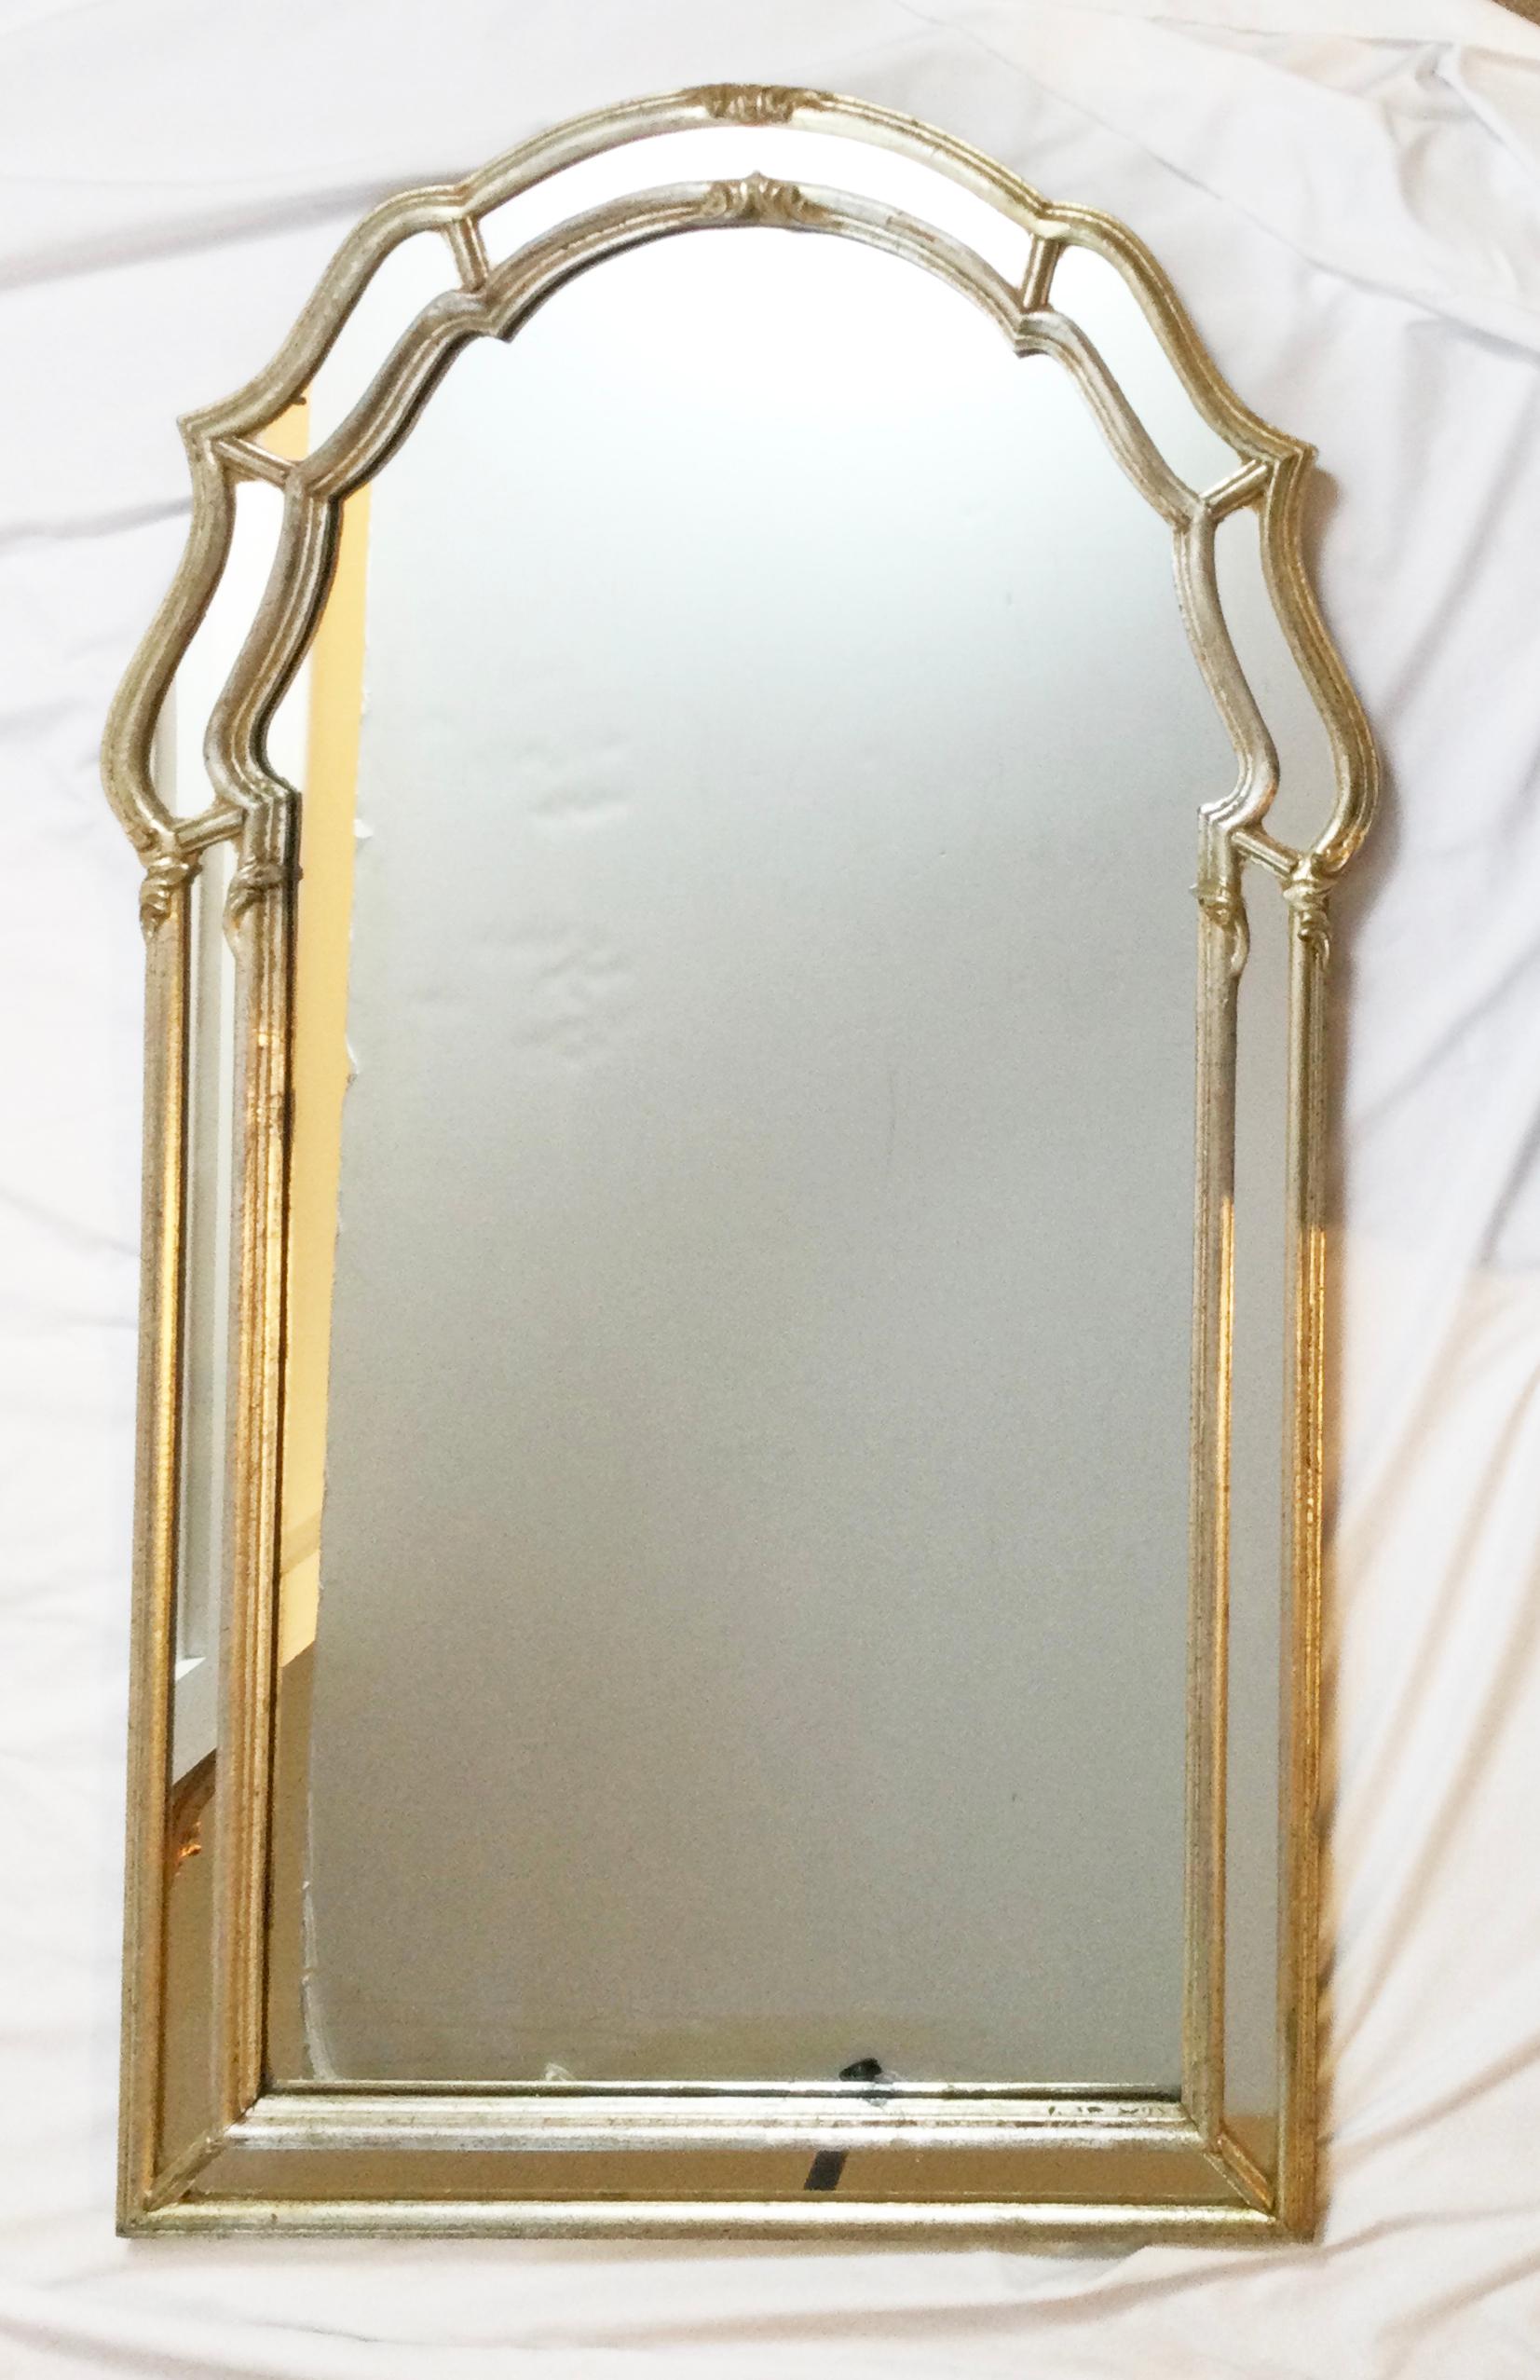 Mid-Century Venetian style silver leaf mirror; Mfg. for Schultz & Berhle. Good original condition with age appropriate wear.
Dimensions: 44